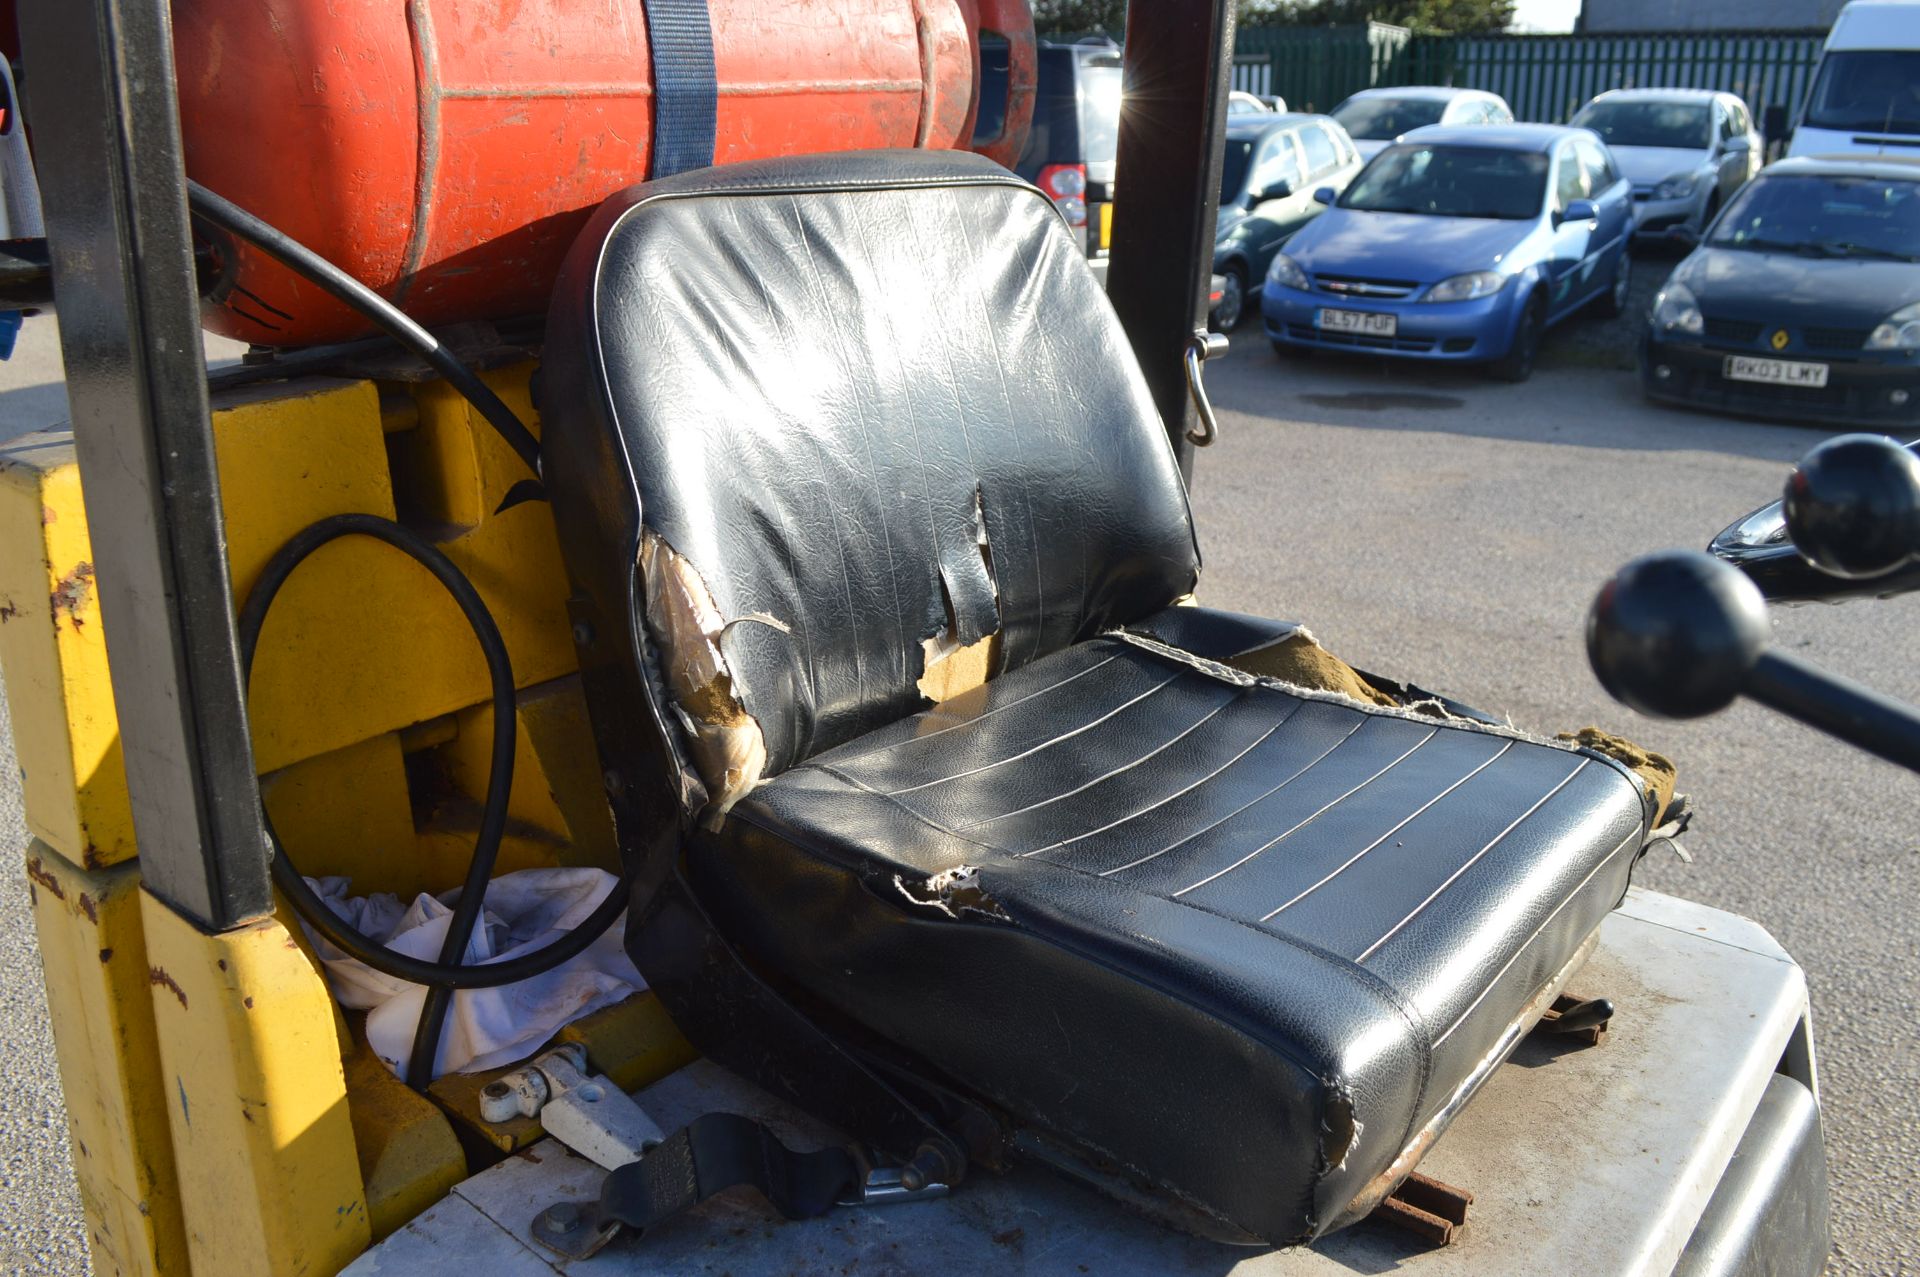 TCM 1.75T LPG FORKLIFT - GAS BOTTLE NOT INCLUDED   BRAKES GOOD RATED CAPACITY: 1600KG MAX FORK - Image 10 of 14